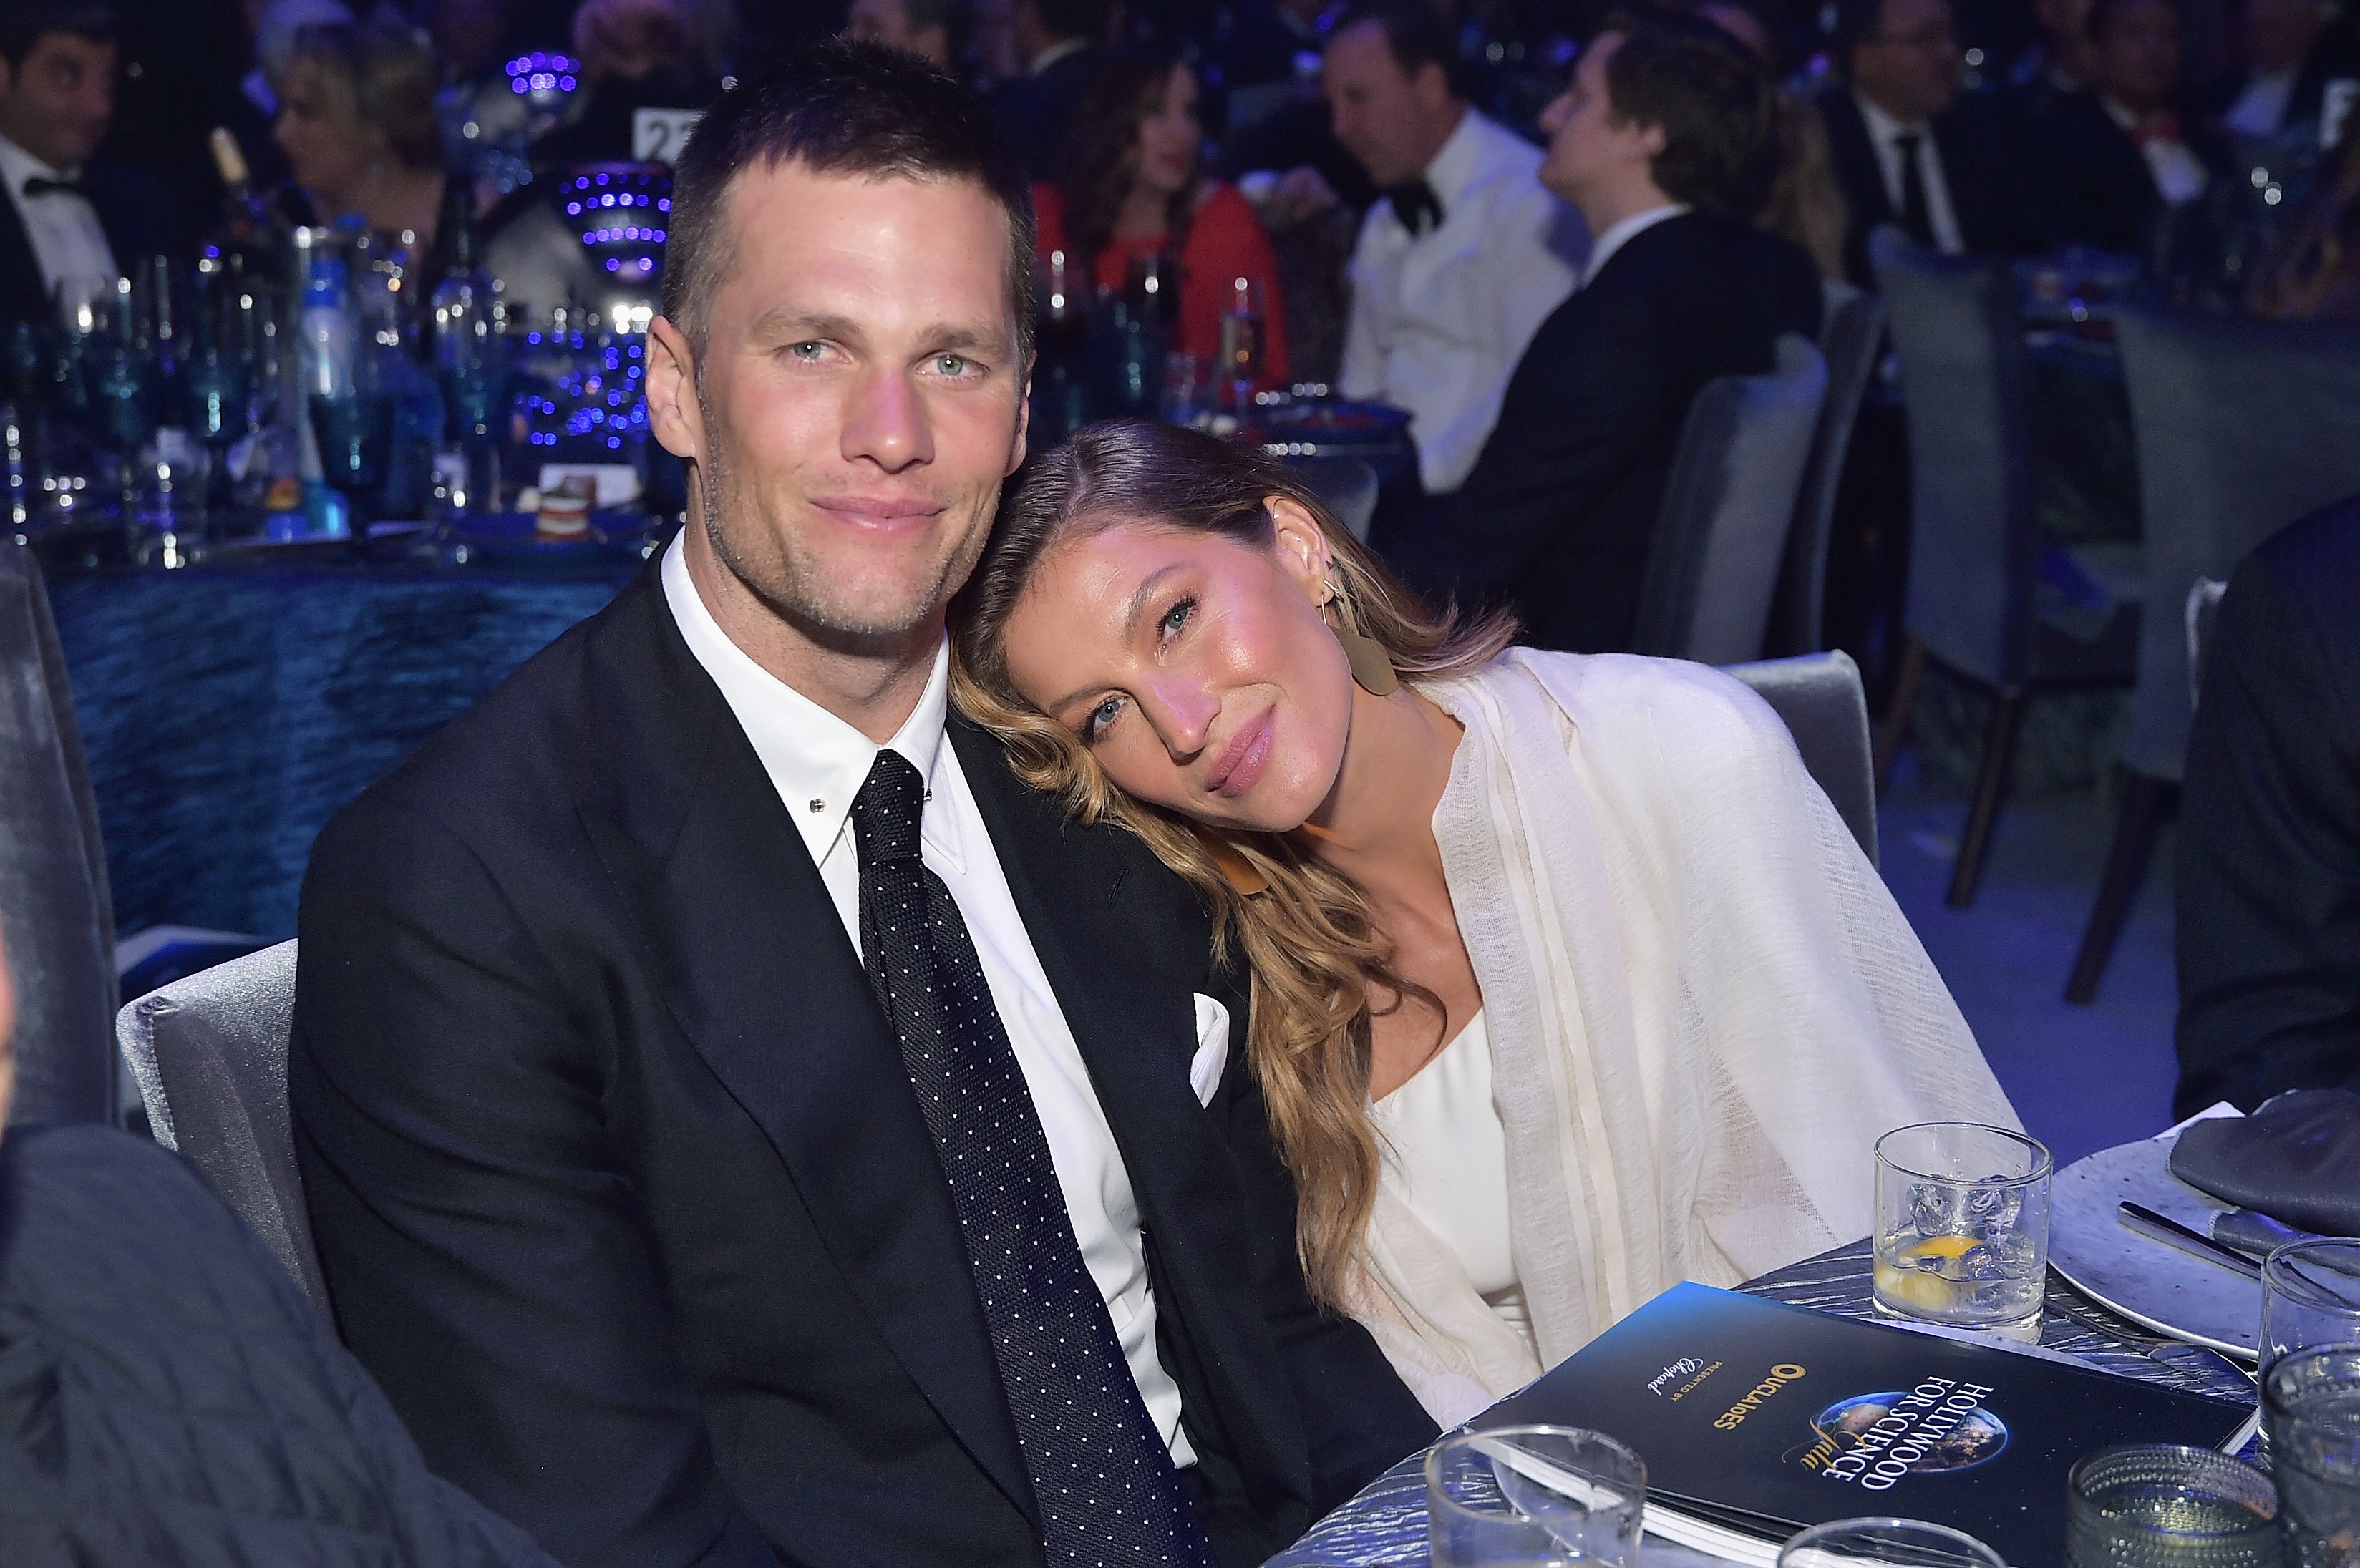 Women get triggered by emotional infidelity than s*xual infidelity”: Tom  Brady Cheated on Gisele Bündchen Forcing Her to File For Divorce, Claims  Megyn Kelly - Animated Times